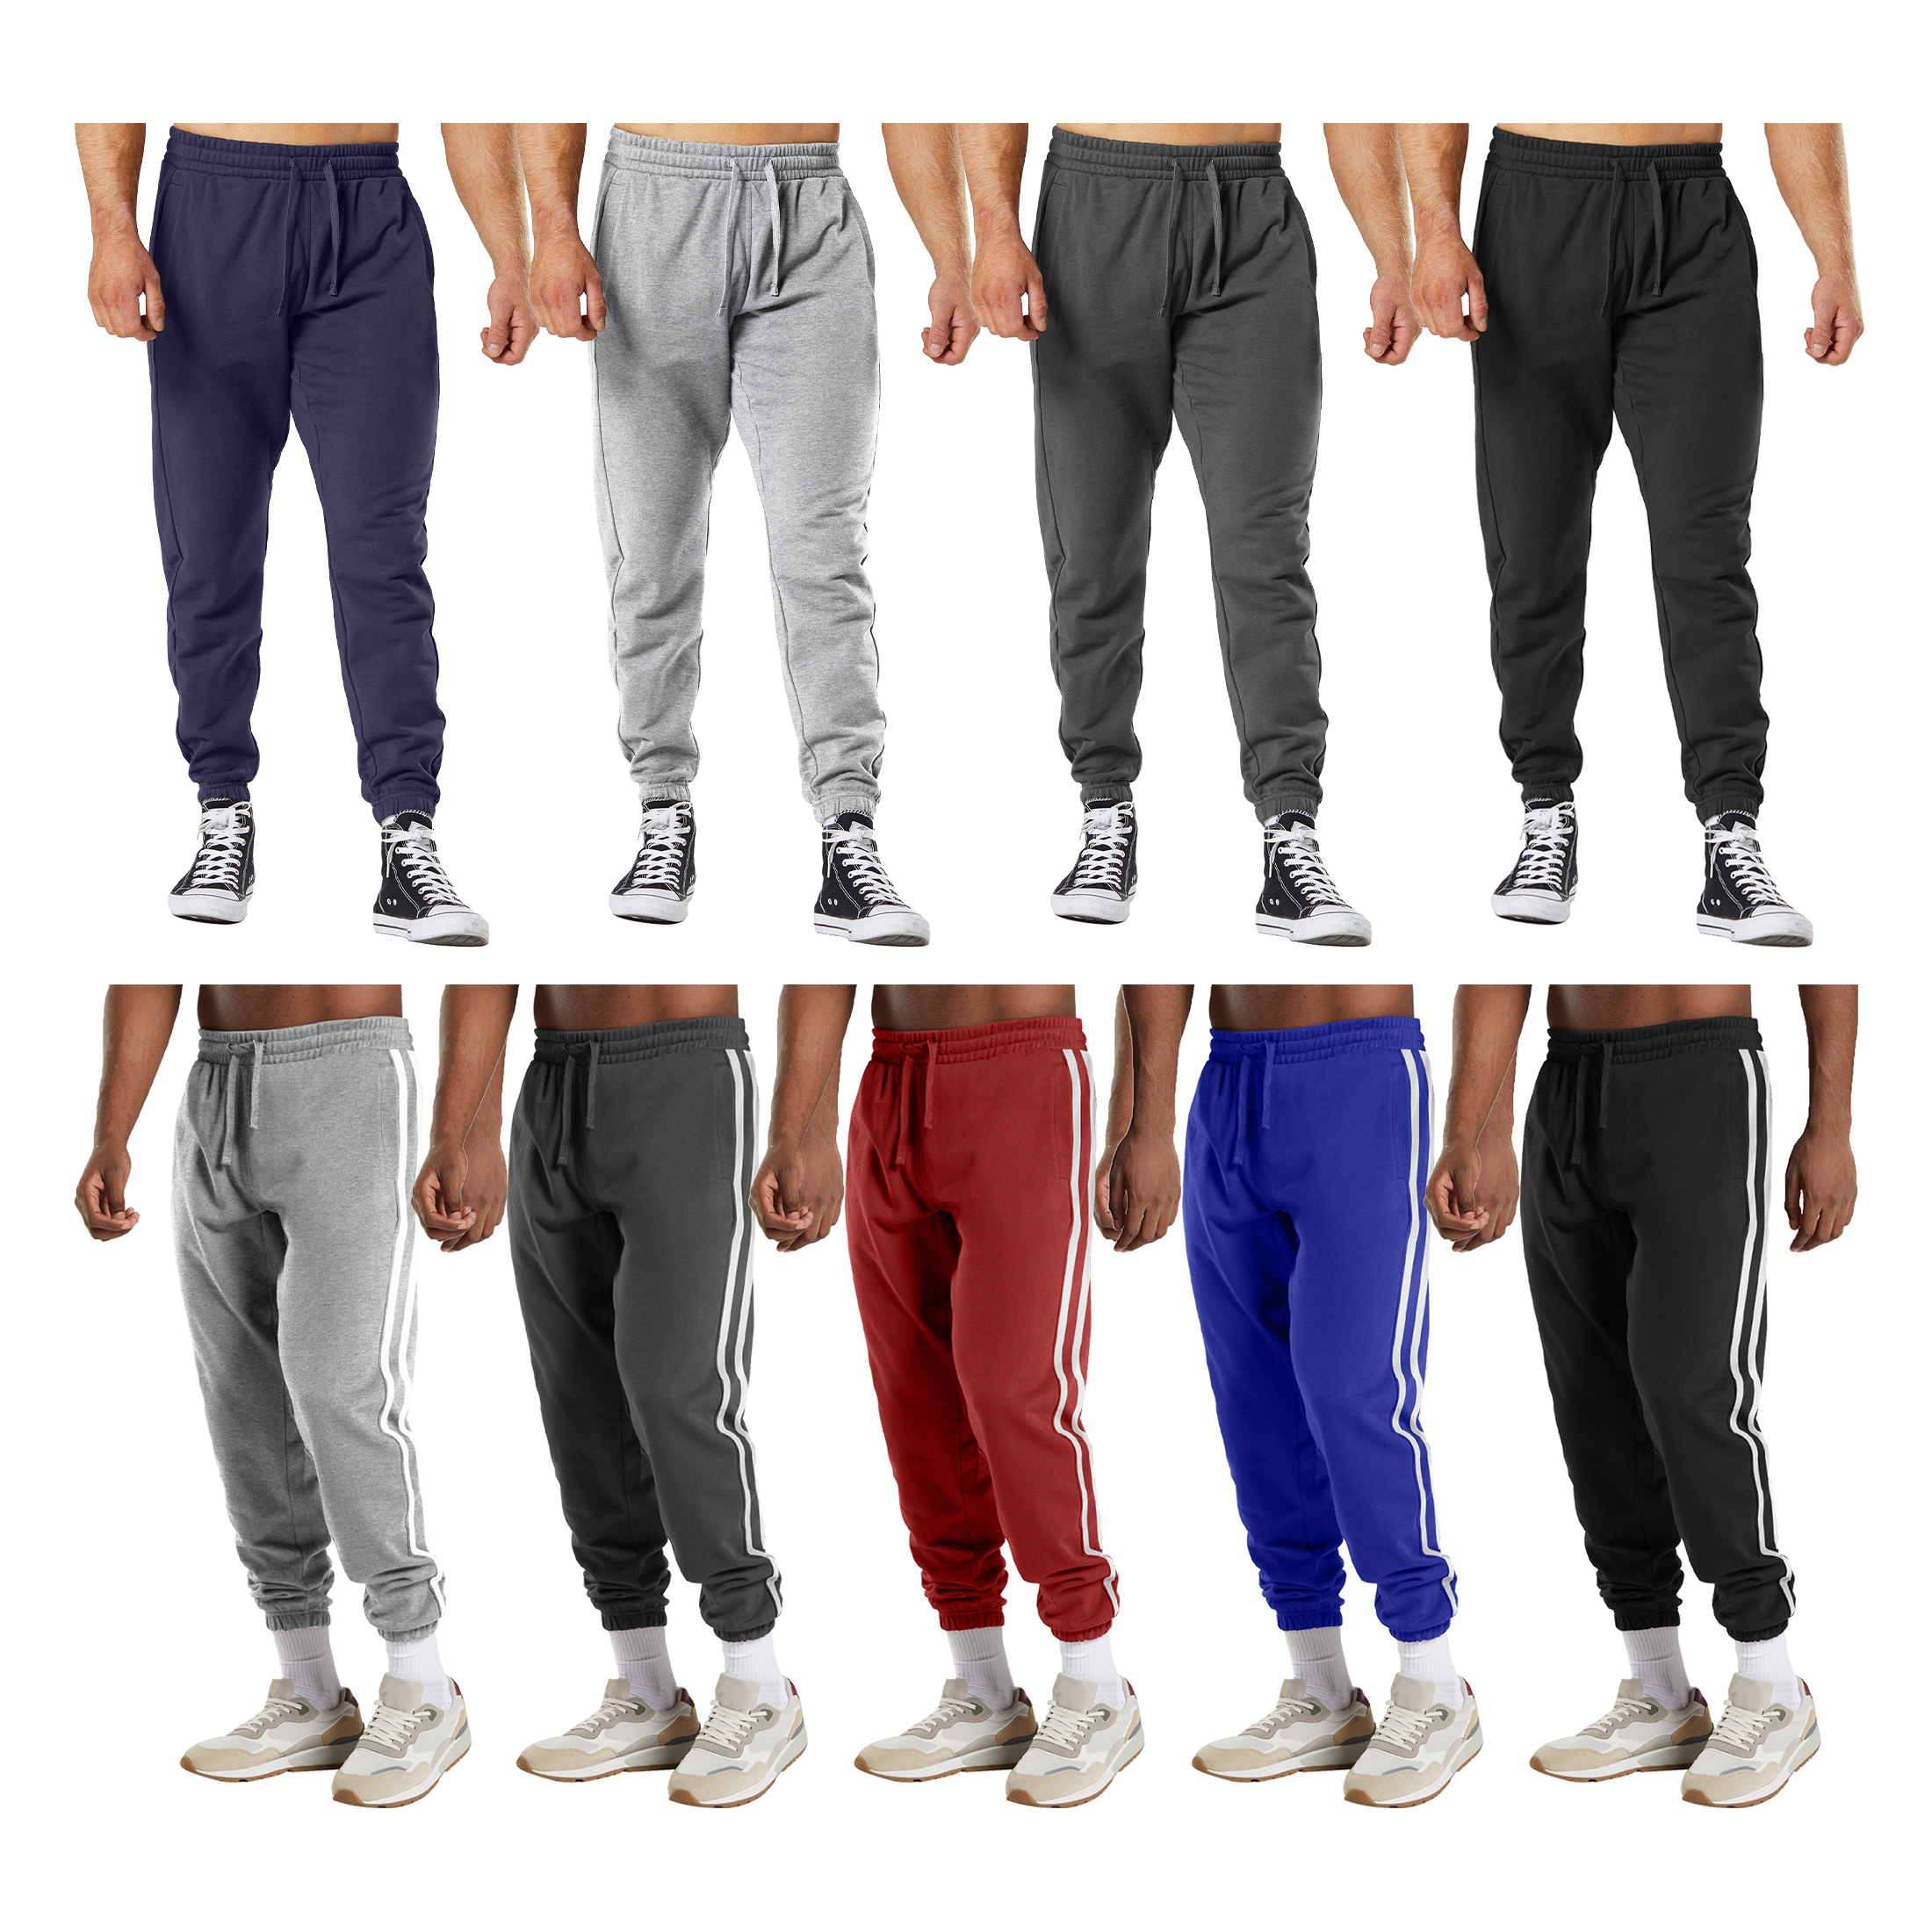 Multi-Pack: Men's Casual Fleece-Lined Elastic Bottom Jogger Pants With Pockets - 1-PACK, L